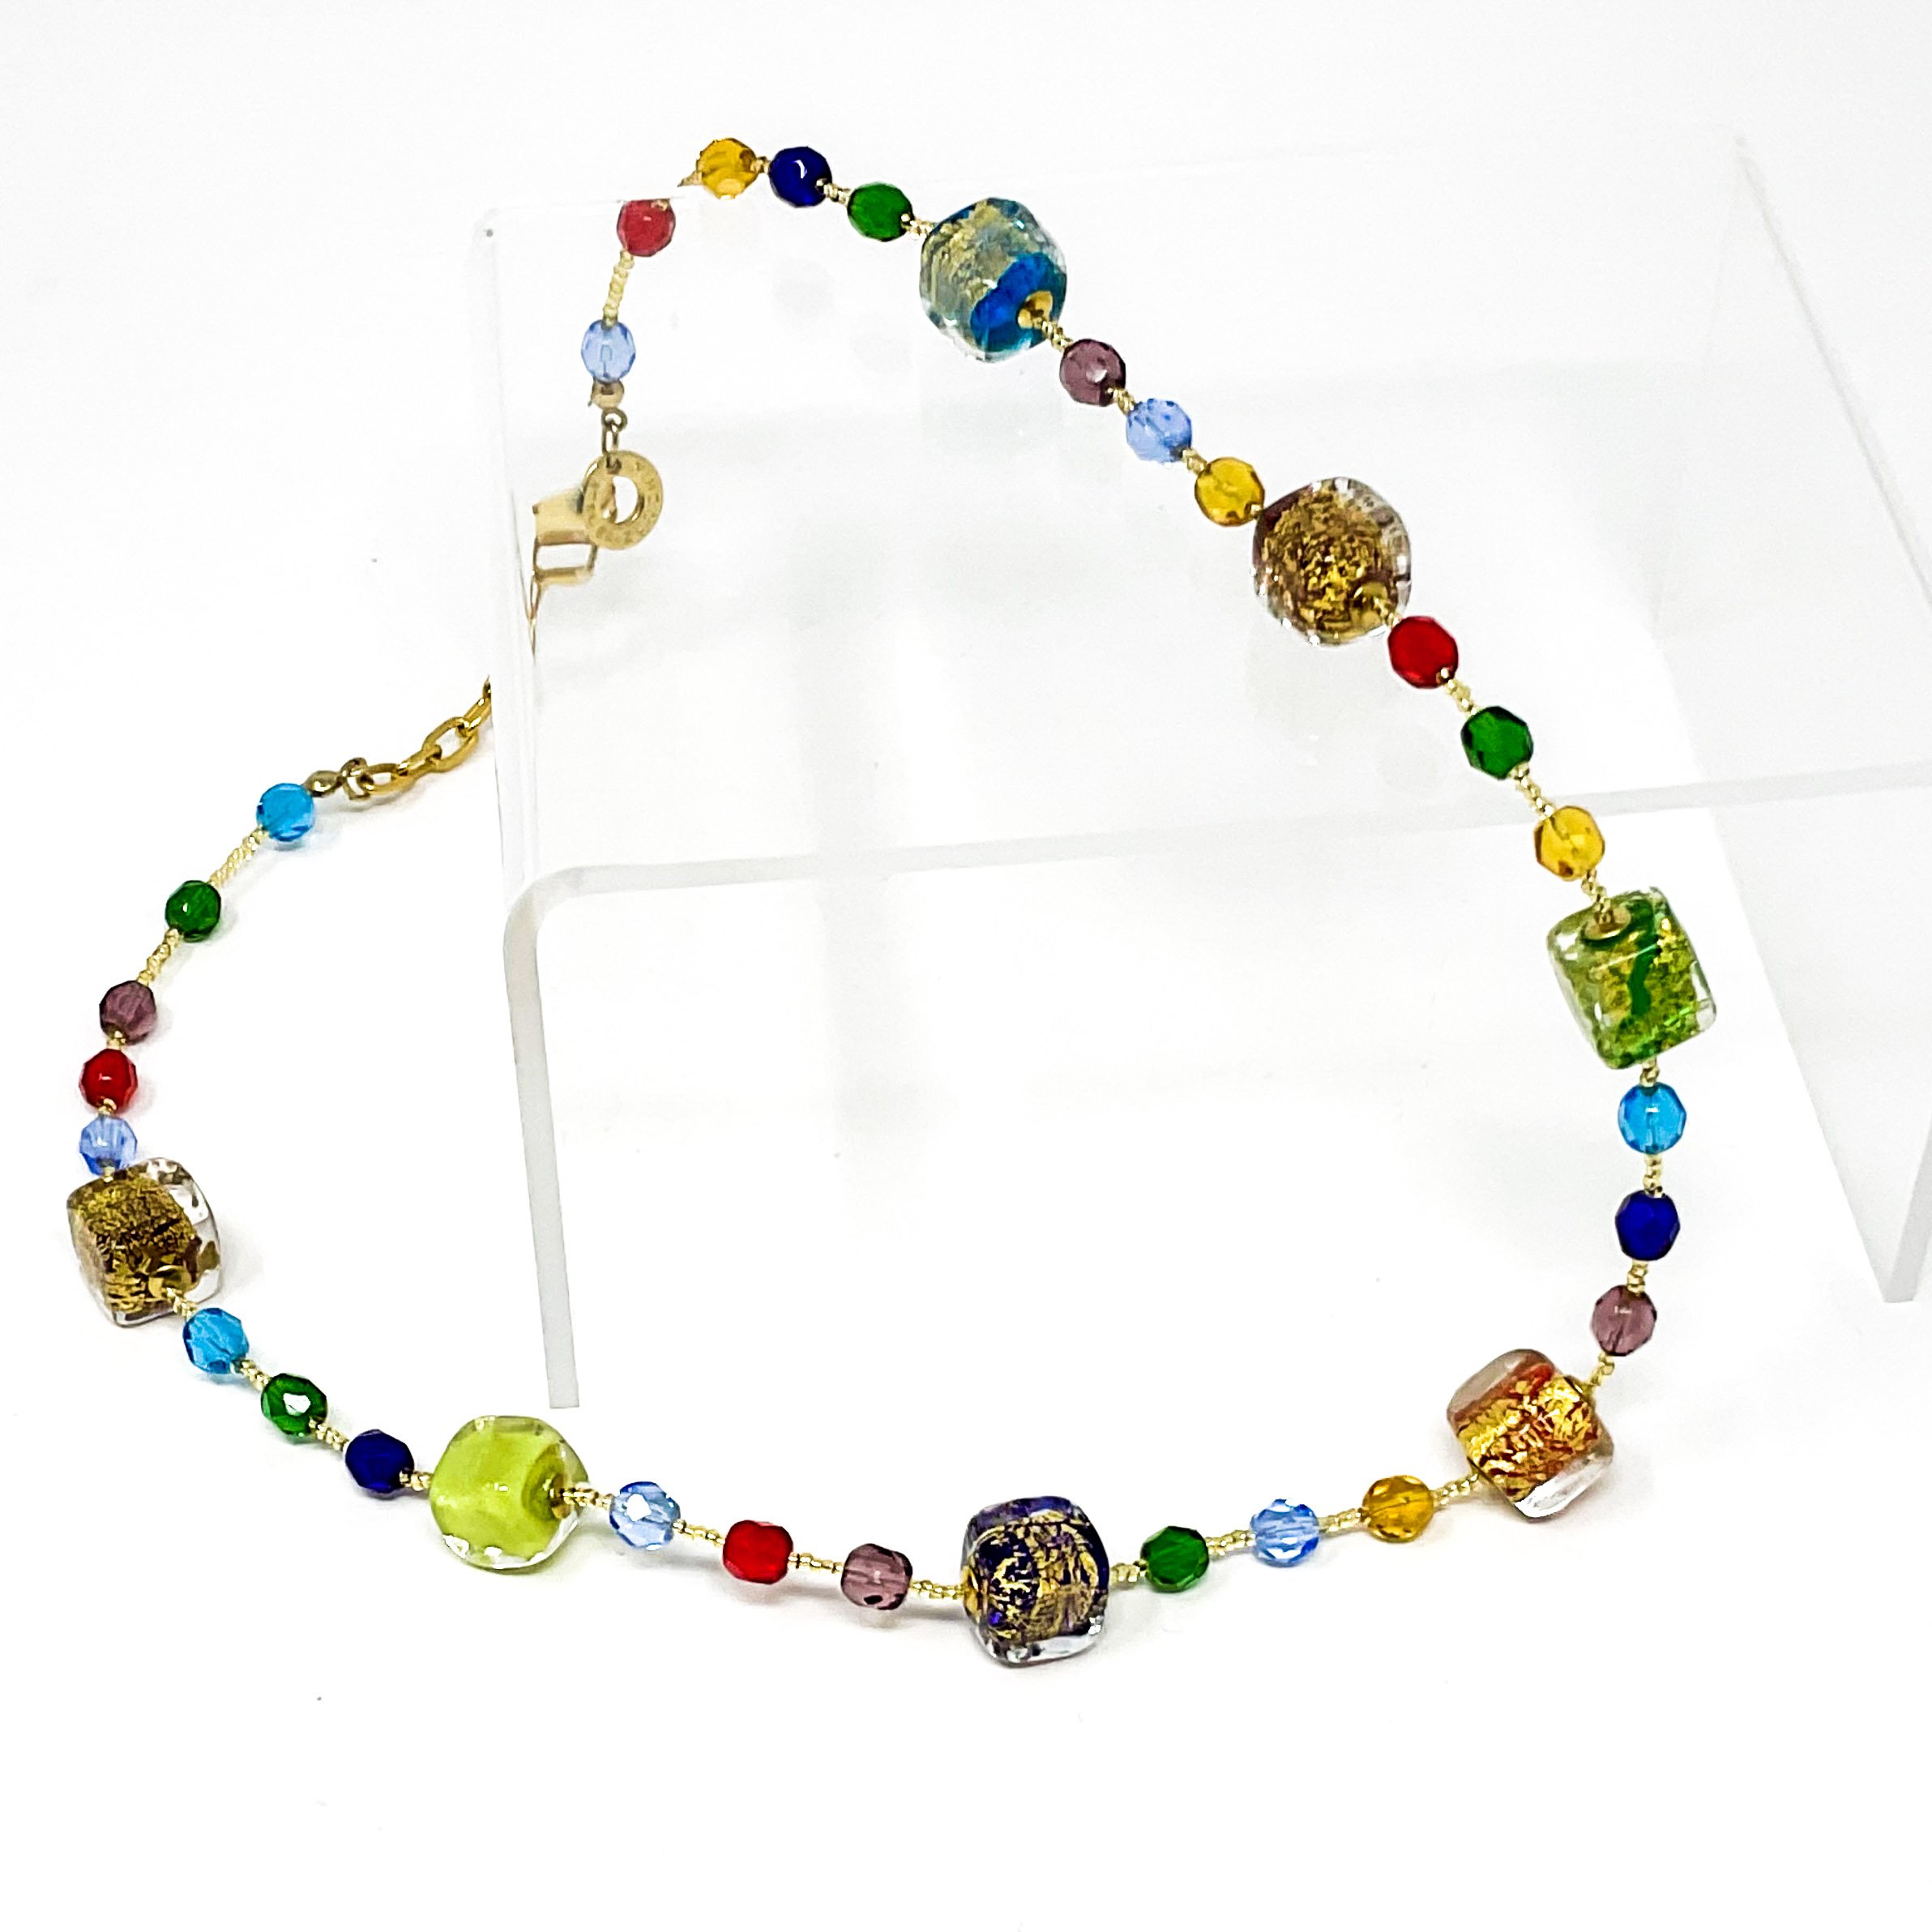 Murano Glass Necklace and Earrings Sets | Murano Glass Millefiori Necklace  and Earrings Jewelry Set - Multicolor